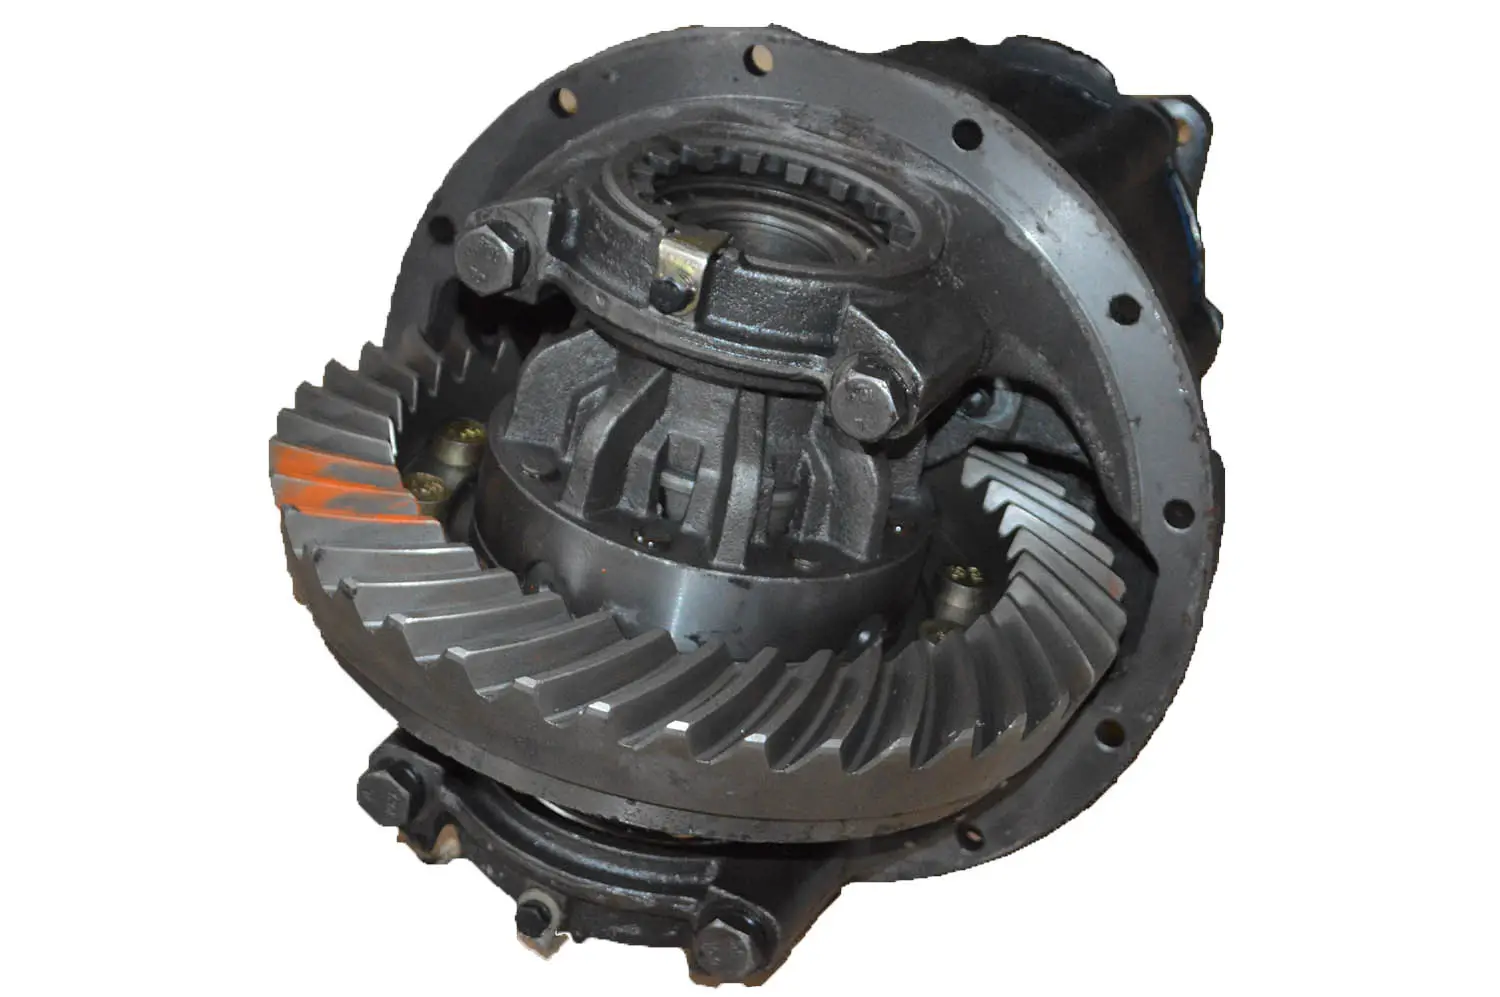 Final Drive Complete Differential Assembly 2402000-Hf17030d6-4.33 For Foton Truck